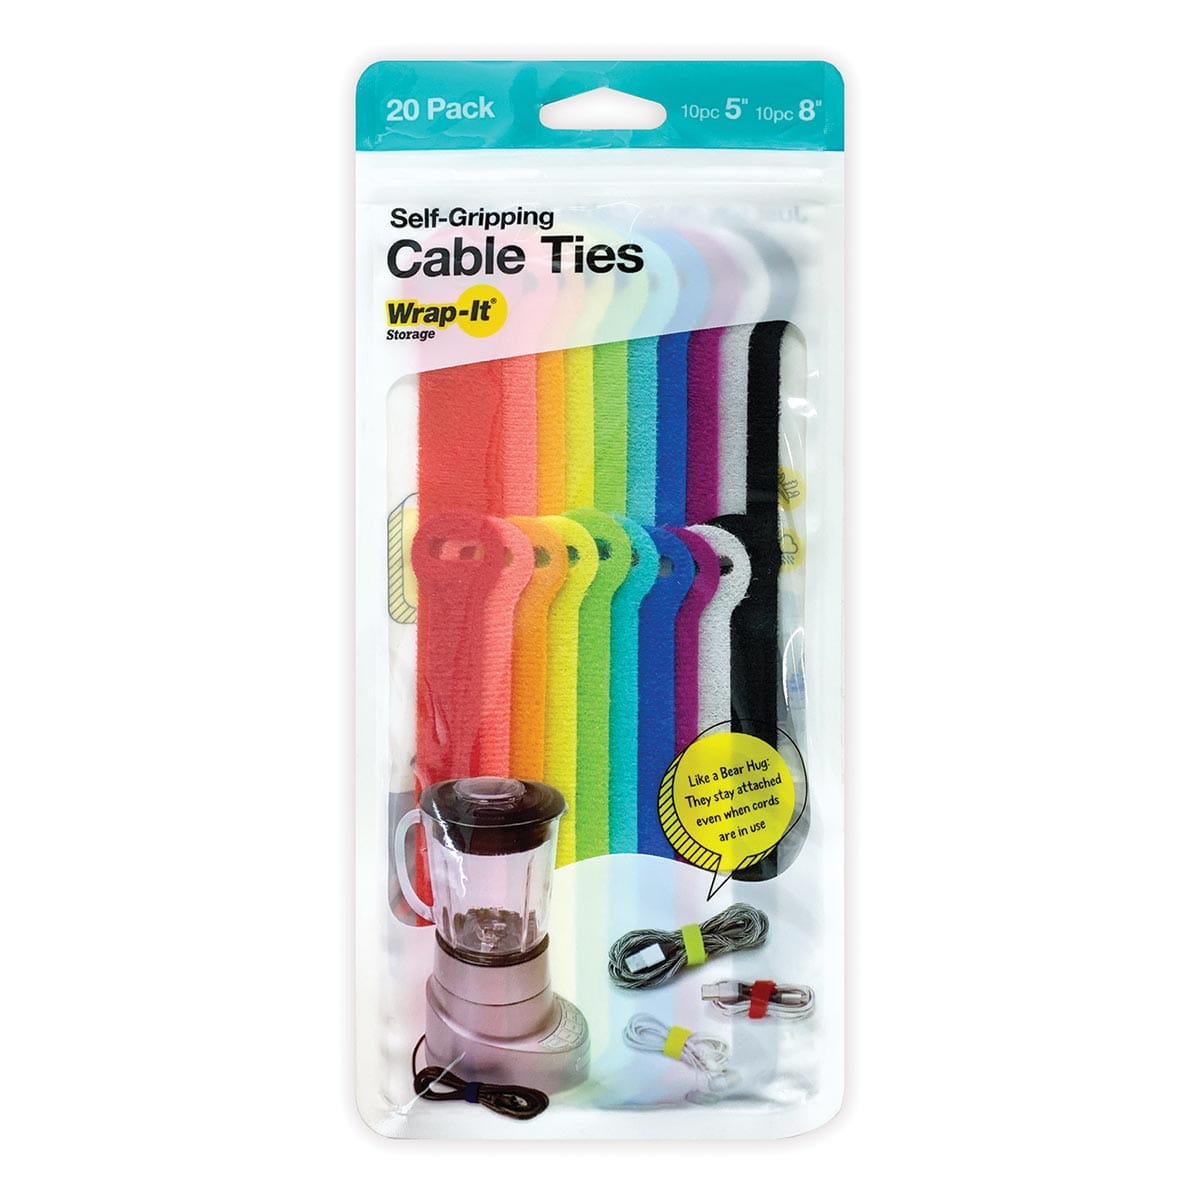 Wrap-It Storage Self-Gripping Cable Ties - 20-Pack in Assorted Sizes and Colors (5", 8")